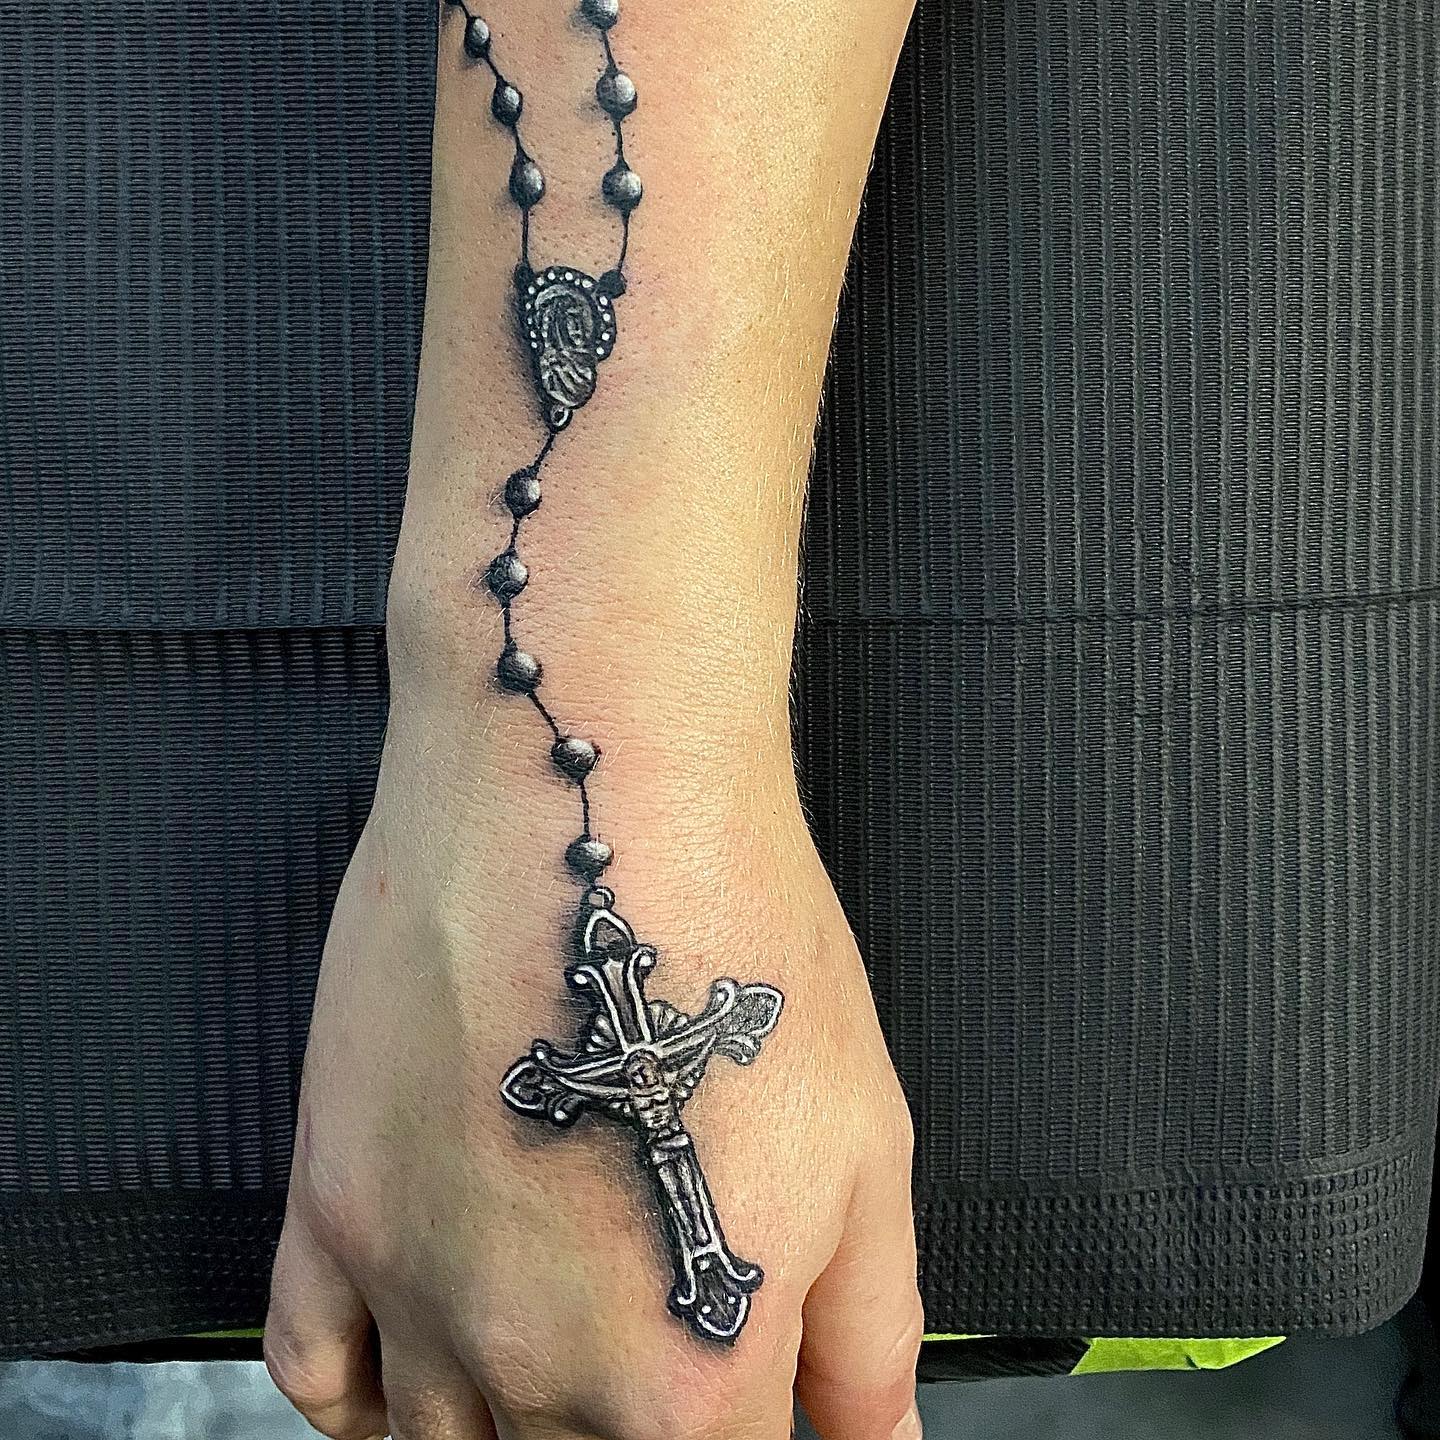 101 Best Forearm Rosary Tattoo Ideas That Will Blow Your Mind!